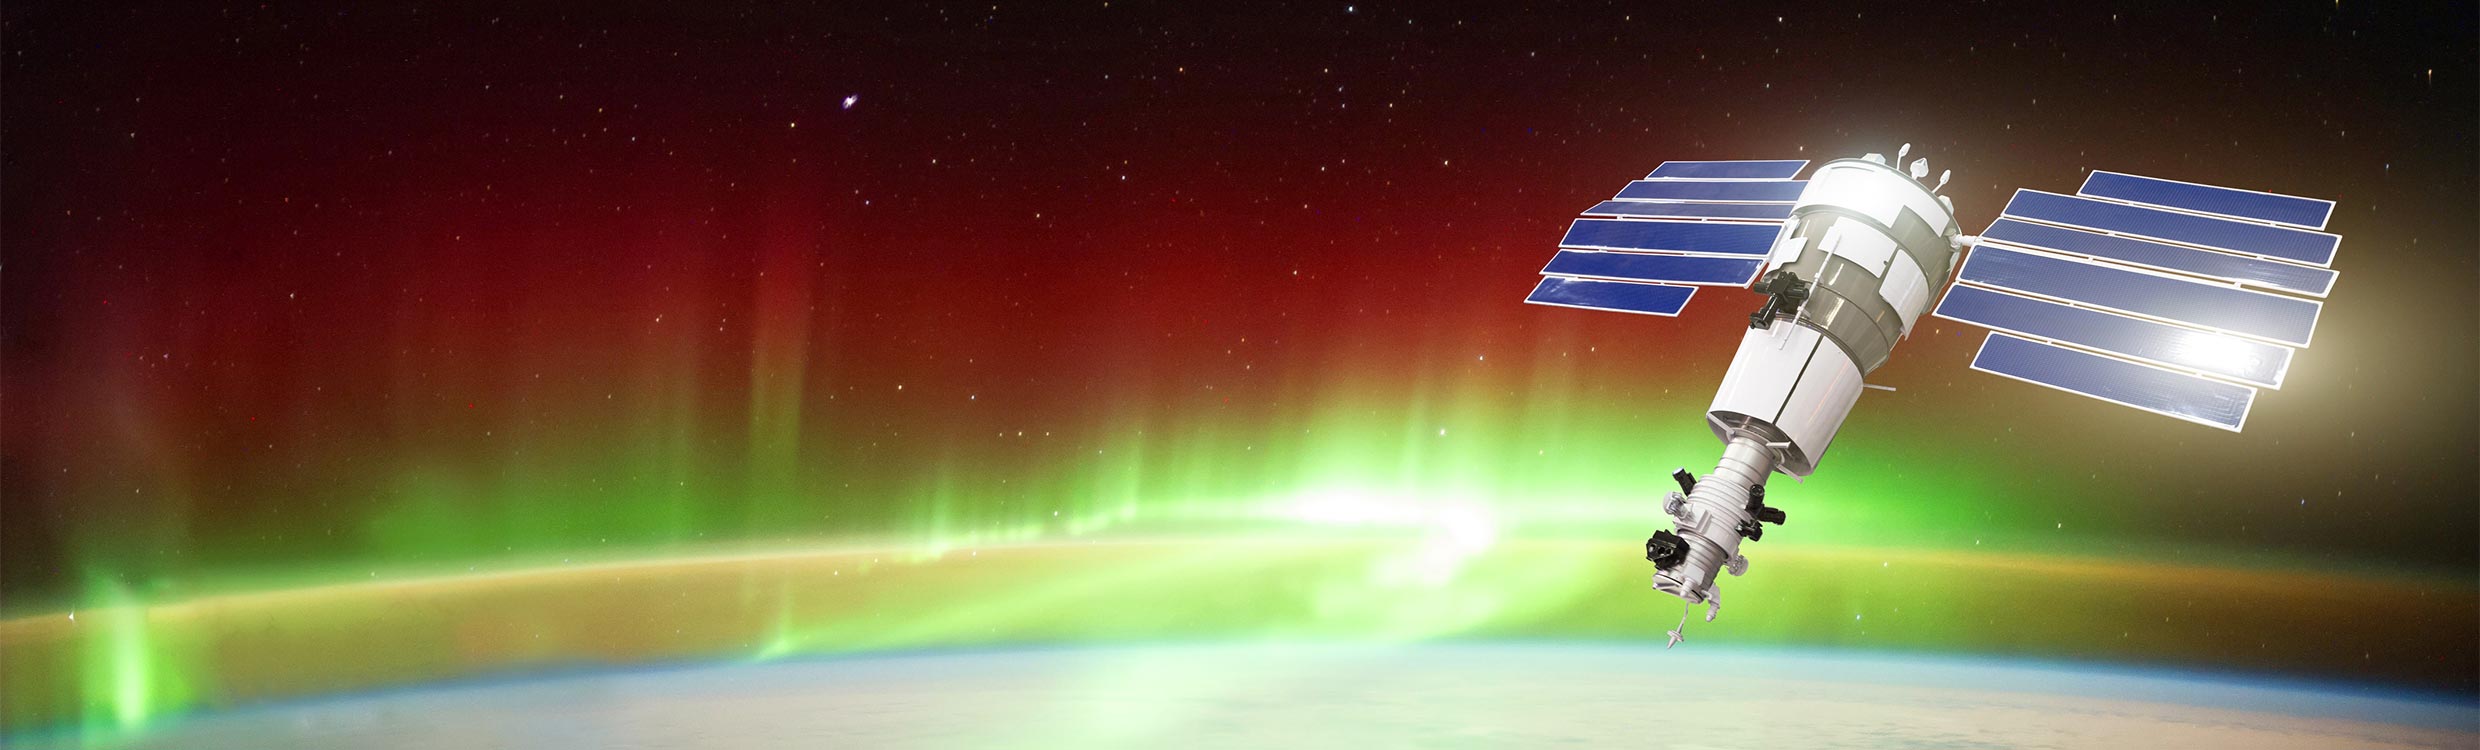 Satellite in space with aurora